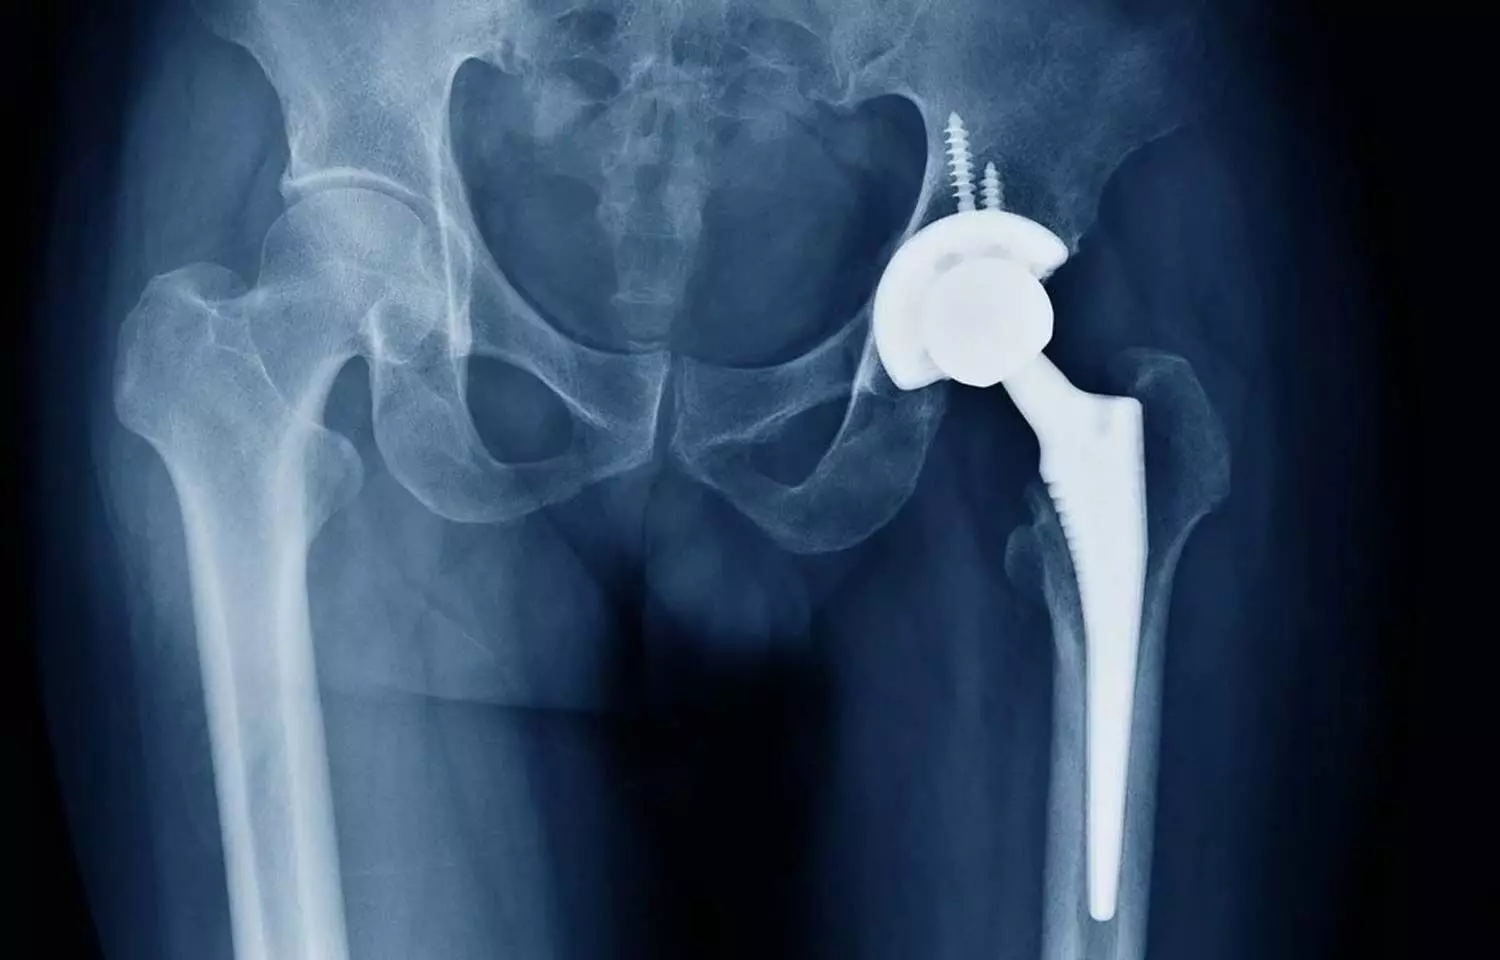 Preoperative factors may predict severity of BMD loss after hip replacement: Study